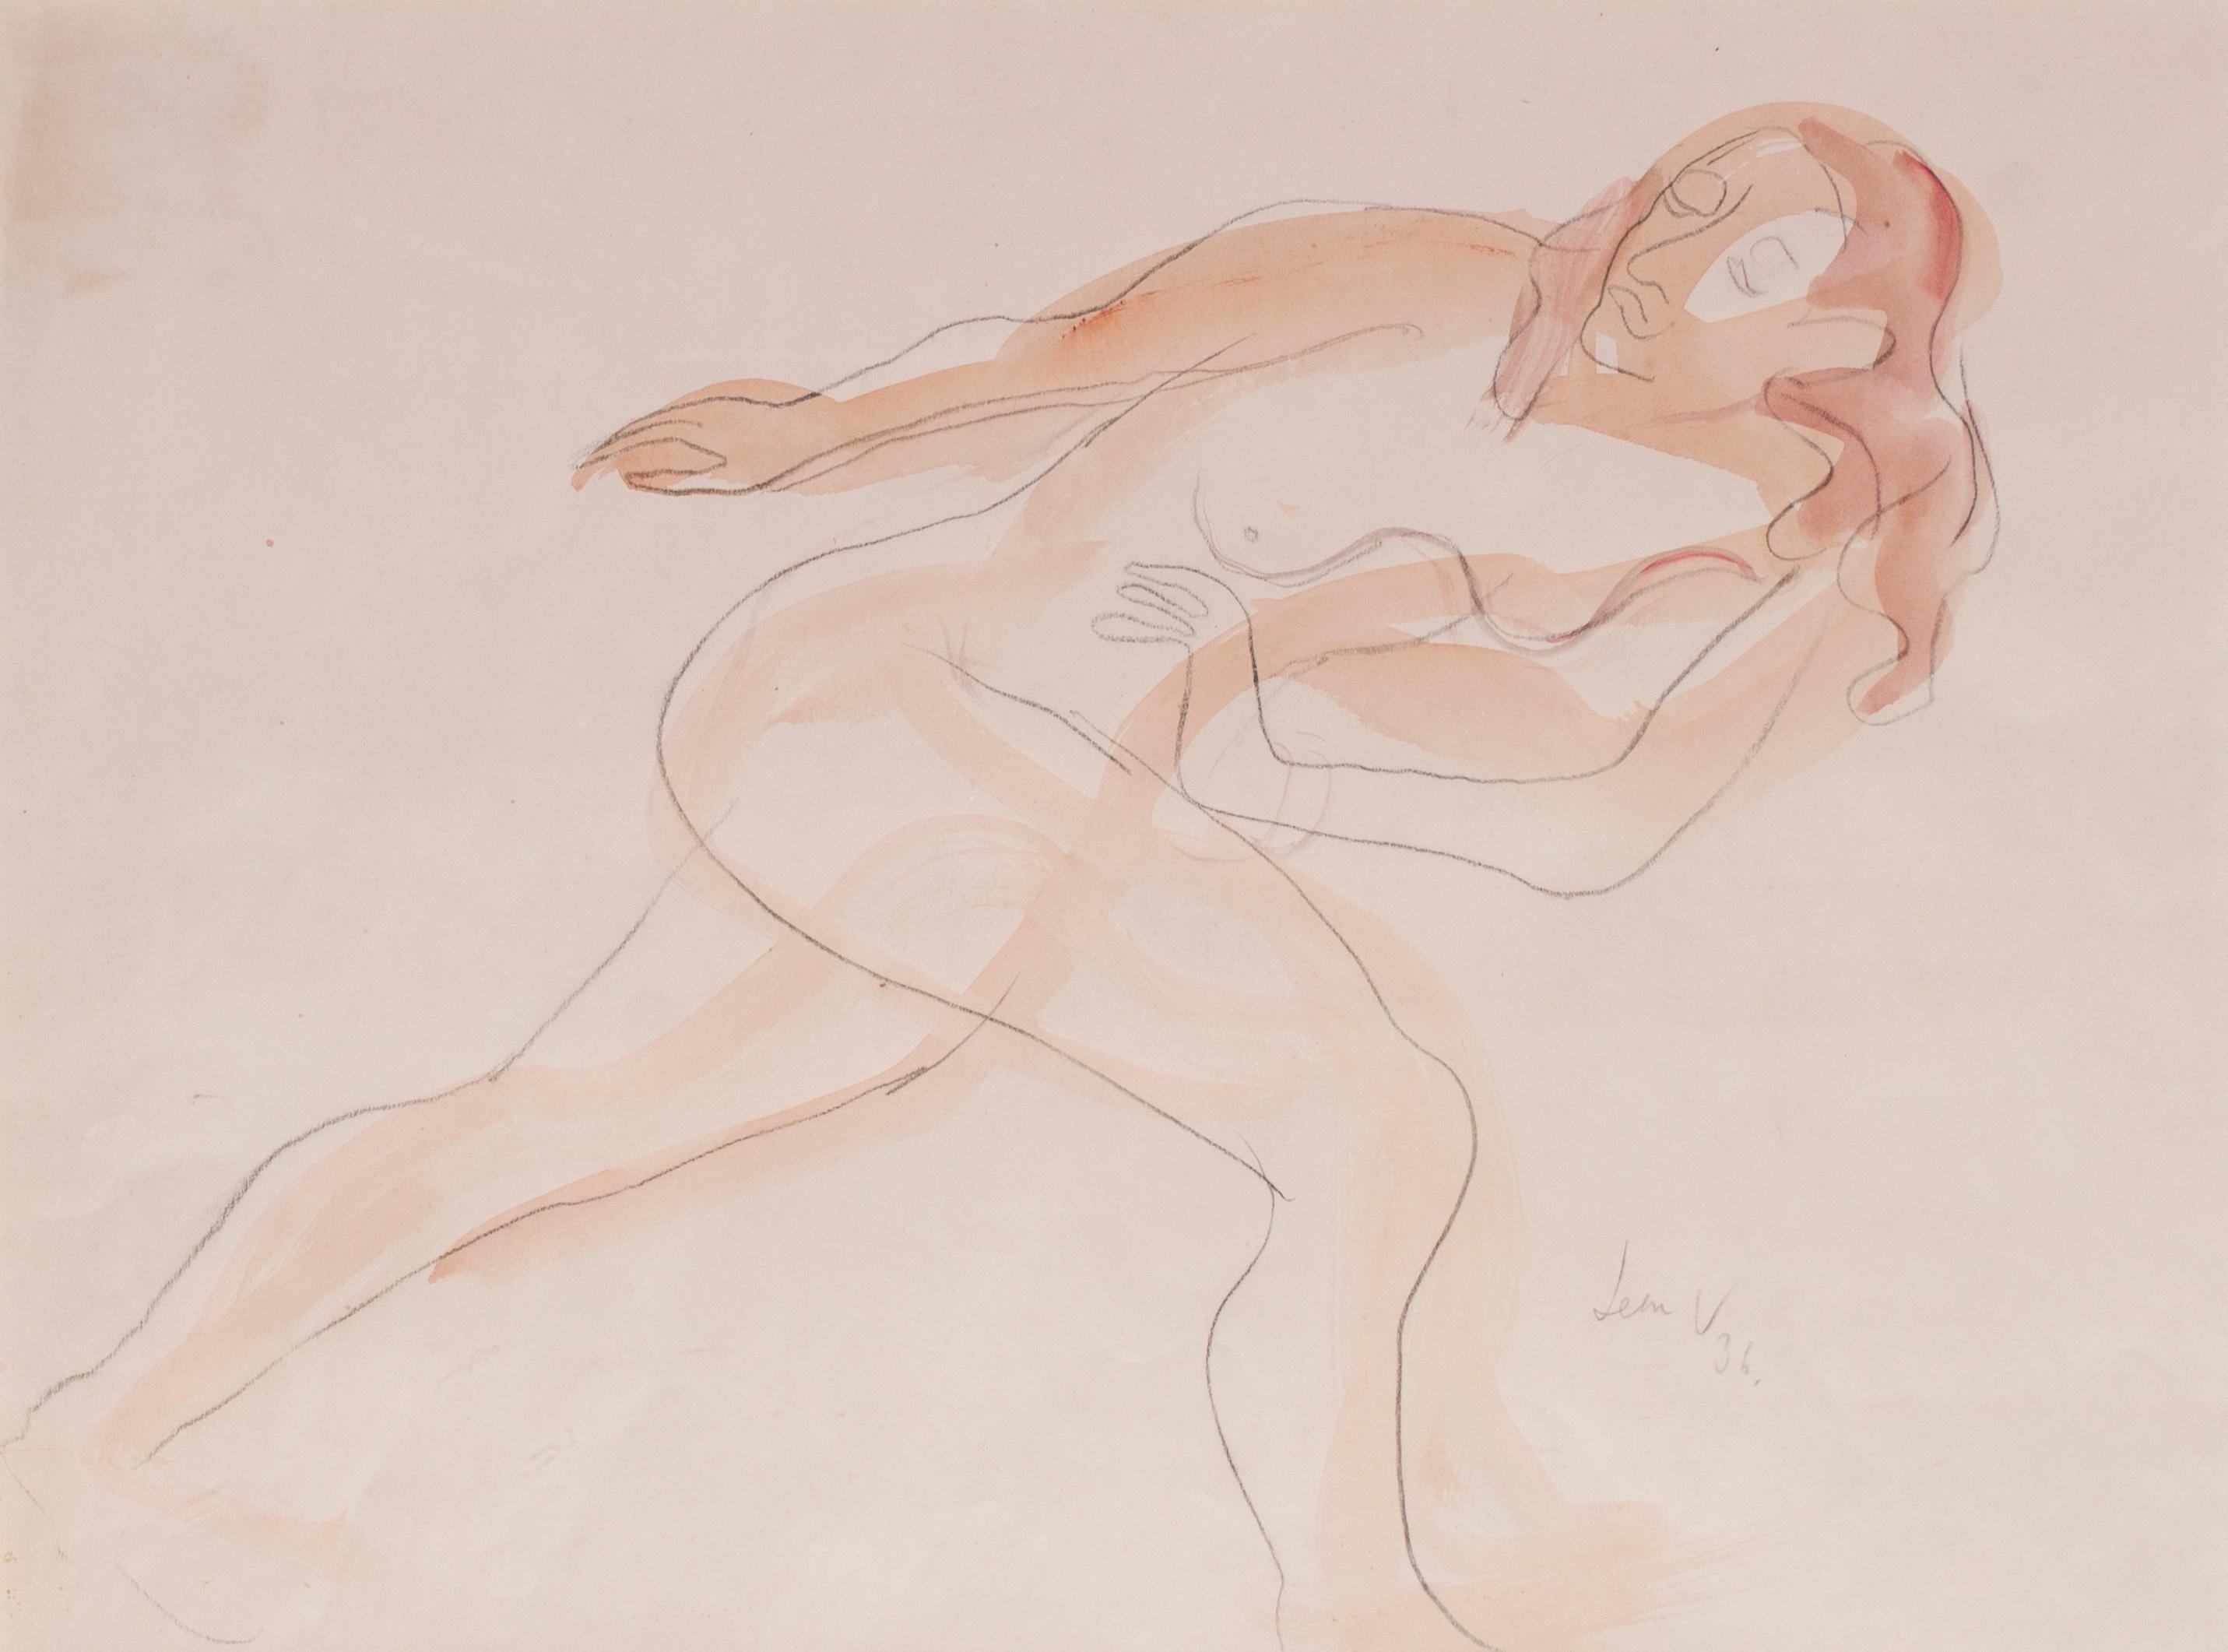 Leon Underwood
Stretching nude
Signed and dated ‘Leon U / 36’
Pencil heightened with watercolour on buff paper
13.1/4 x 18.1/2 in. (33.8 x 47.2 cm.)

Underwood was known as the precursor of modern sculpture in Britain according to Neve Rothenstein